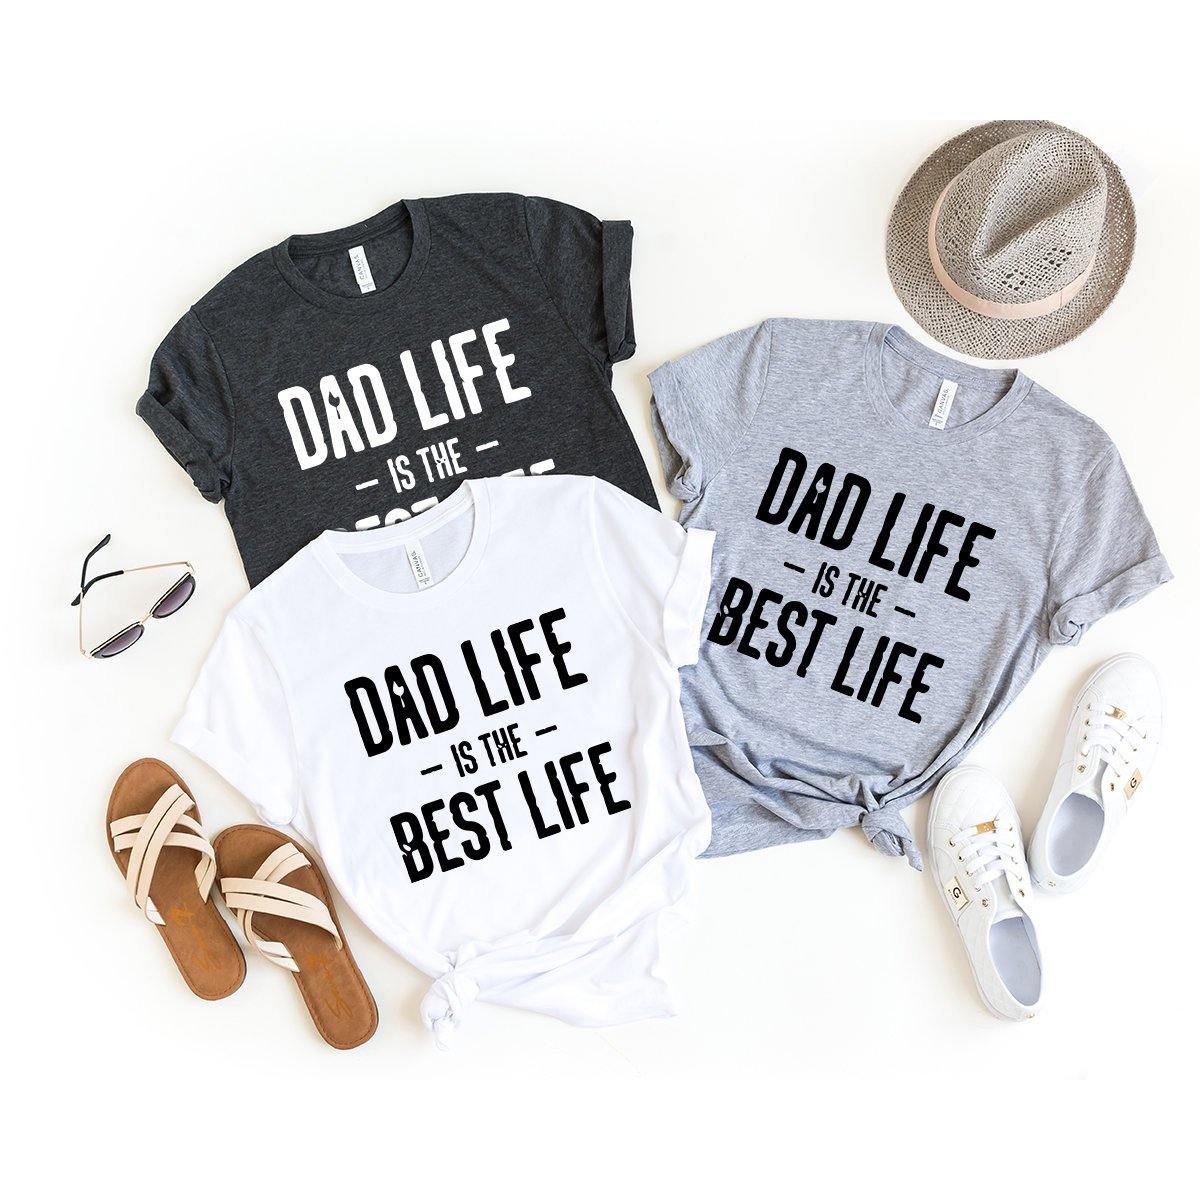 Dad Life Shirt, Dad Shirt, Dad Life Is The Best Life Shirt, Funny Dad Shirt, Dad Birthday Gift, Fathers Day Shirt, Gift For Daddy, Dad Tee - Fastdeliverytees.com